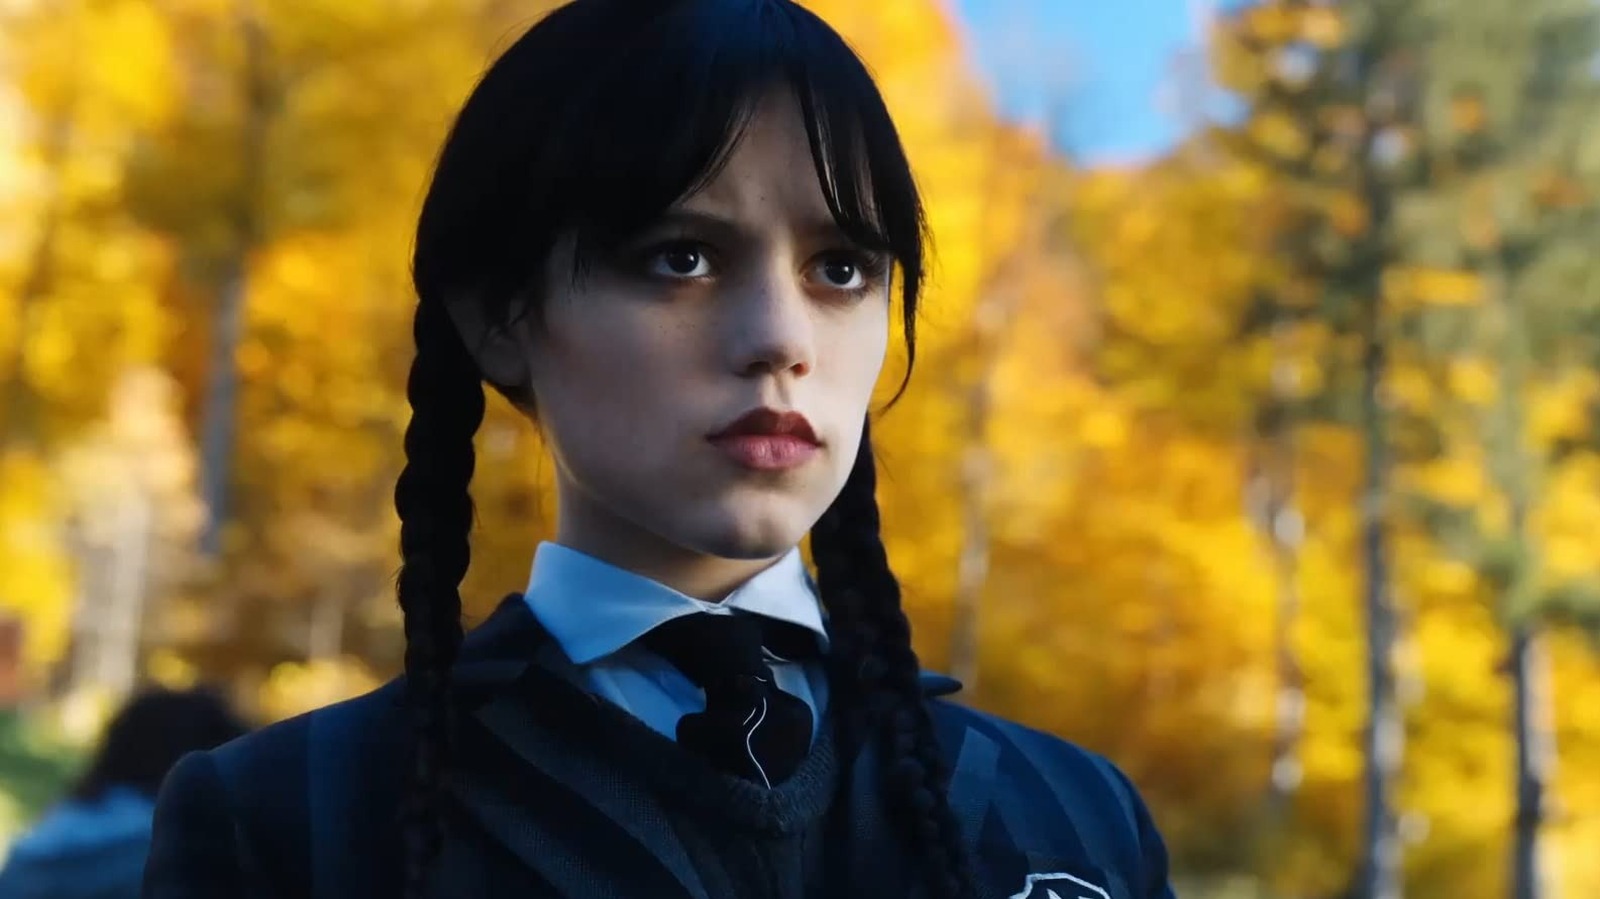 Netflix's 'Wednesday' review: How Tim Burton transforms teen TV with the  Addams Family